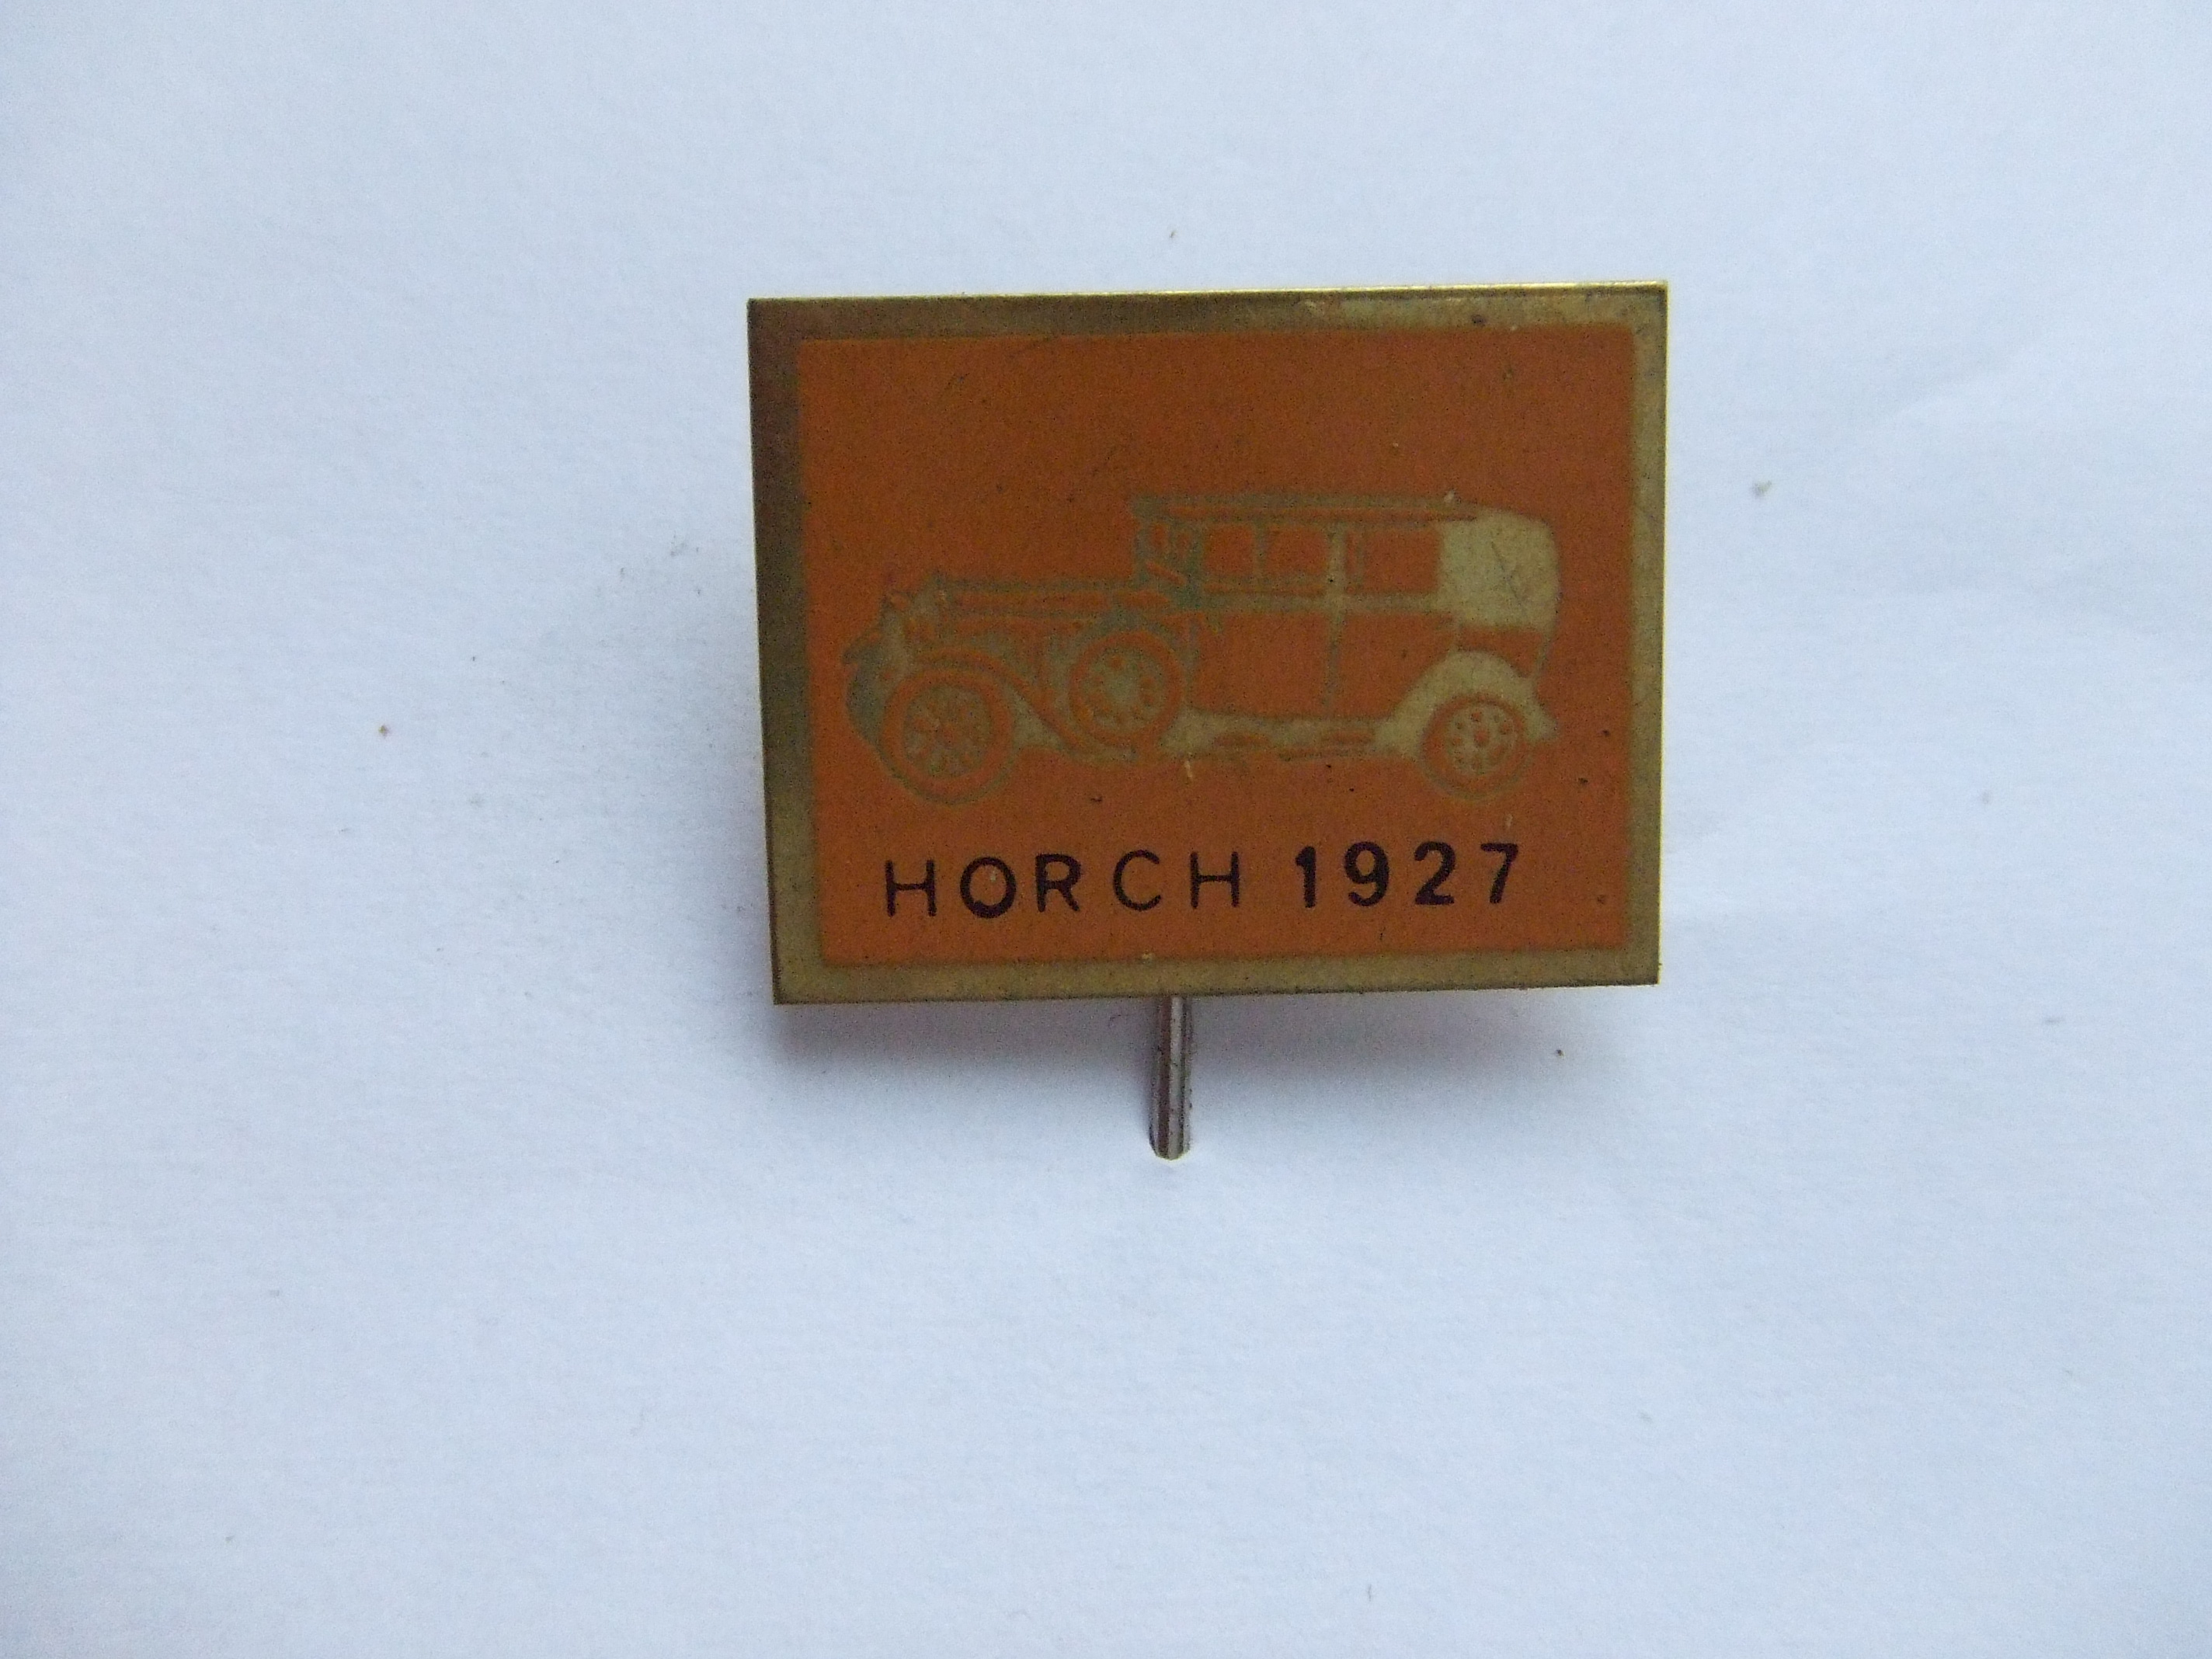 Horch 1927